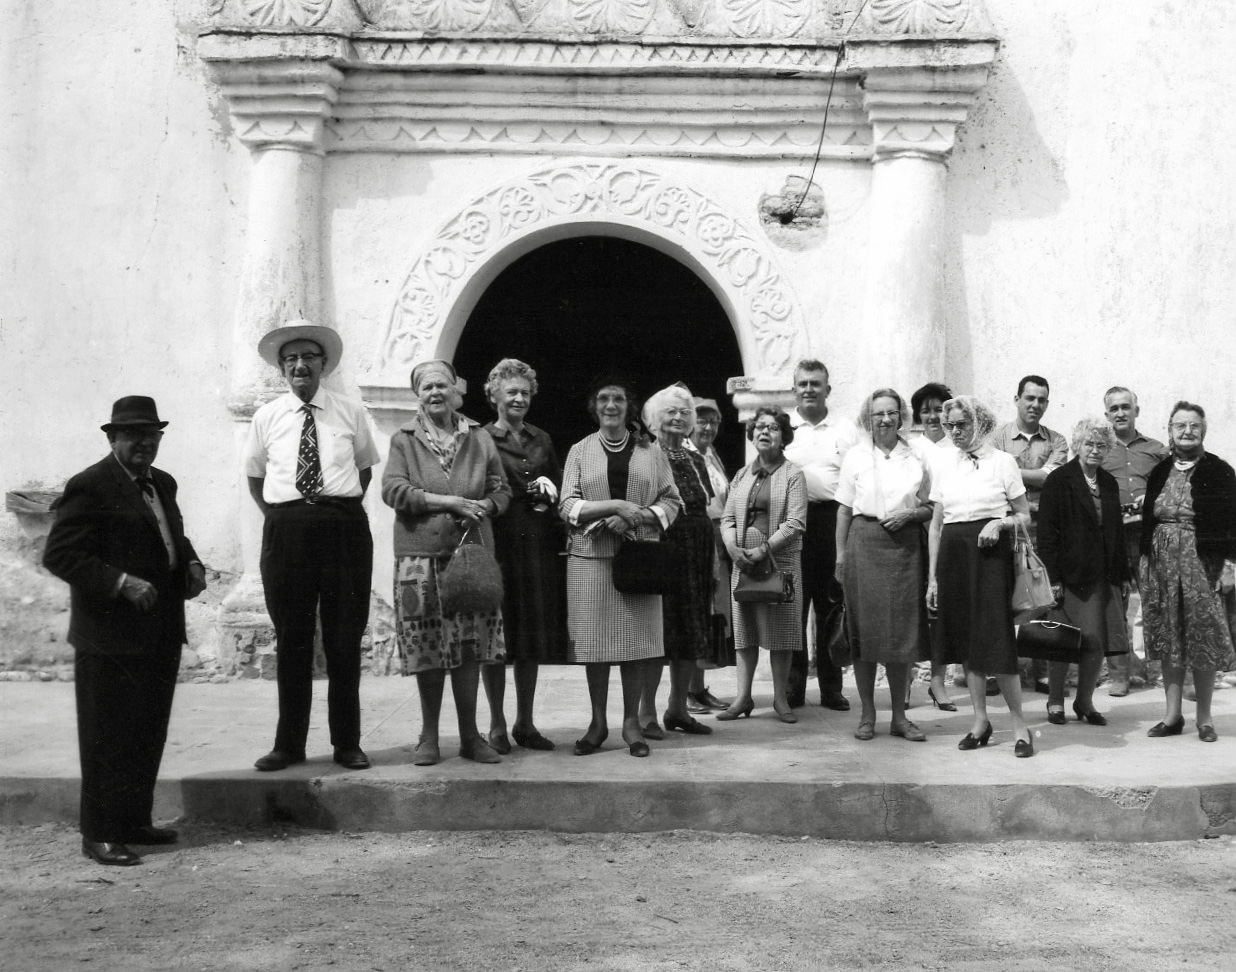 Primeria Alta Society, Nogales, Arizona 1965 group field trip across the border into Nogales, Sonora, Mexico. The trip was to Magdalena, Mexico approximately 56 miles to view where Father Kino might be buried. In 1966 his grave was discovered near the Church. View full size.